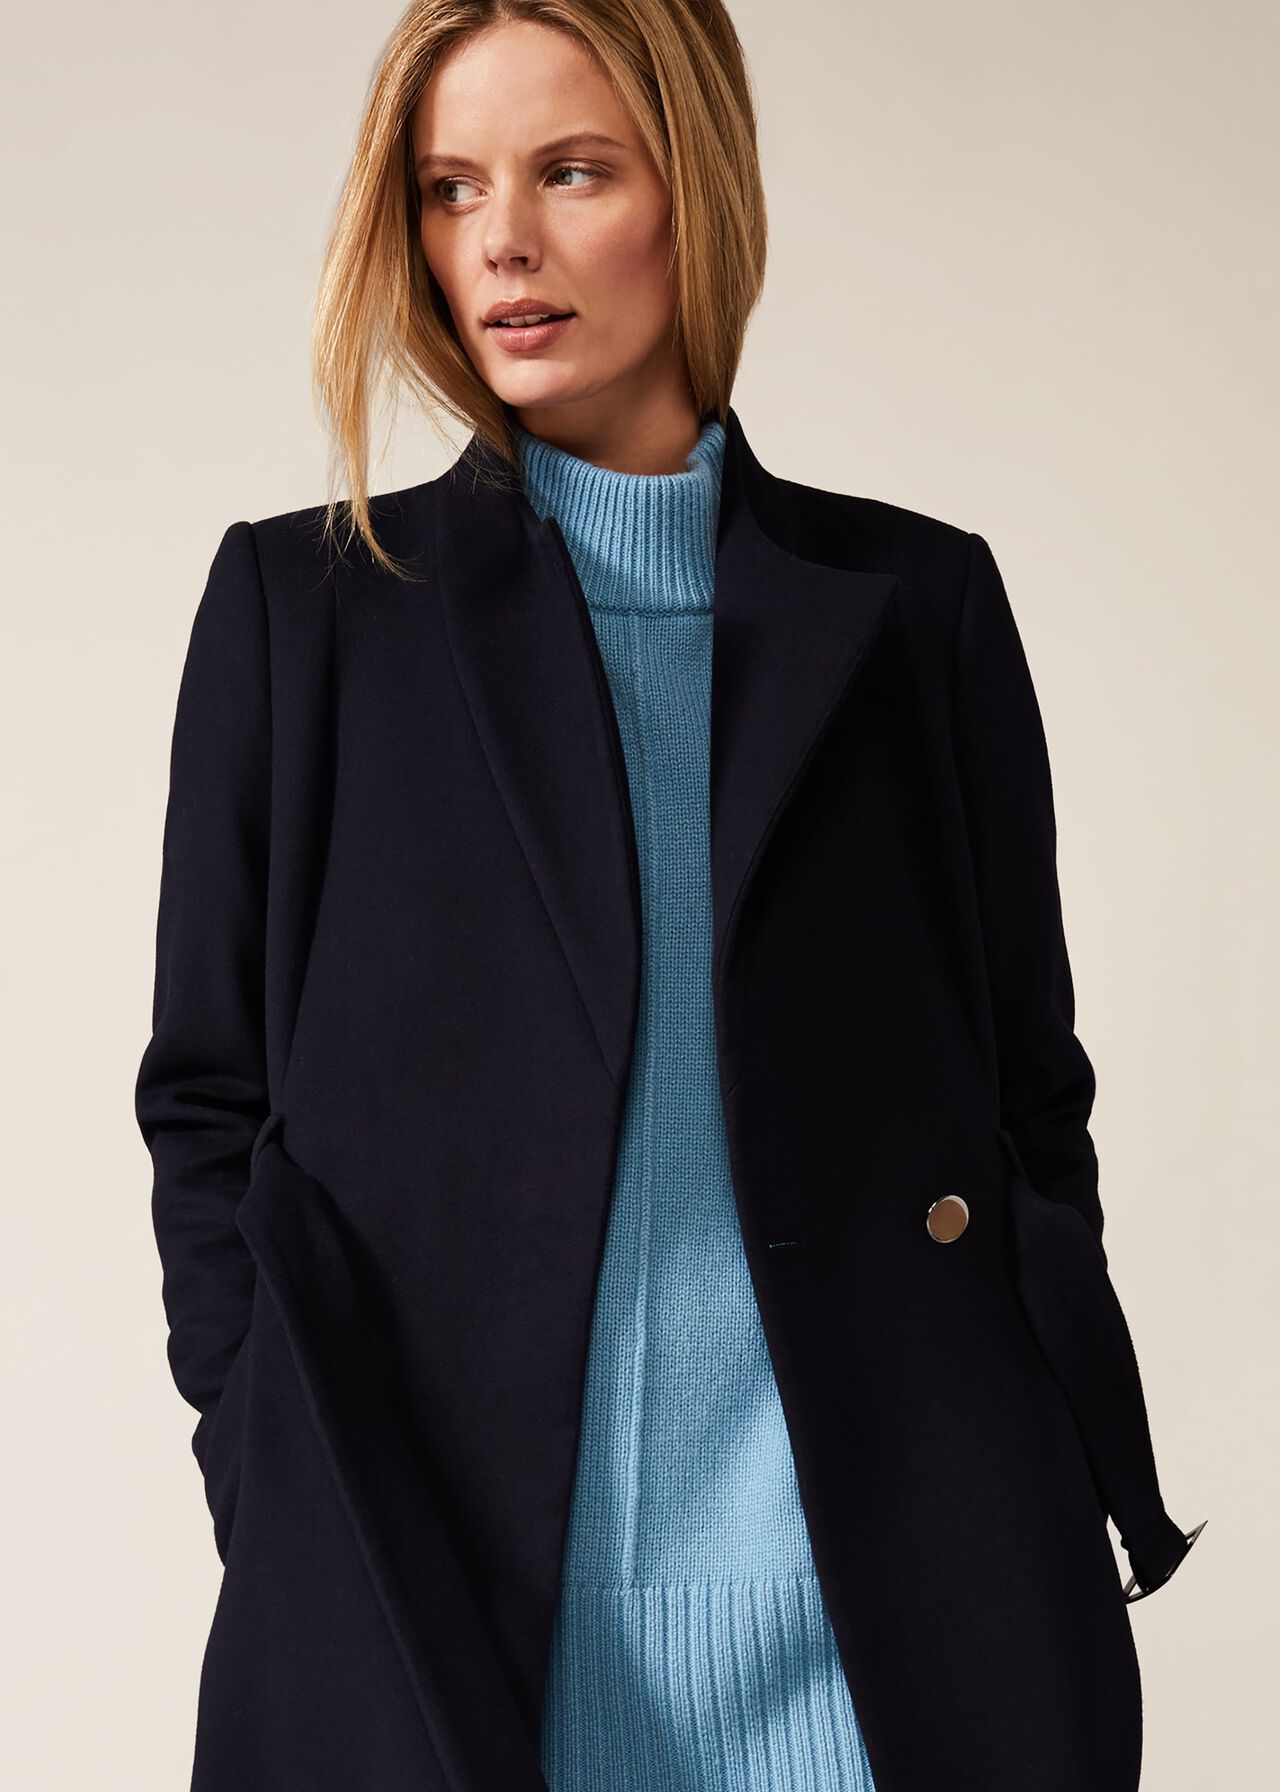 Susie Stand Up Collar Coat | Phase Eight